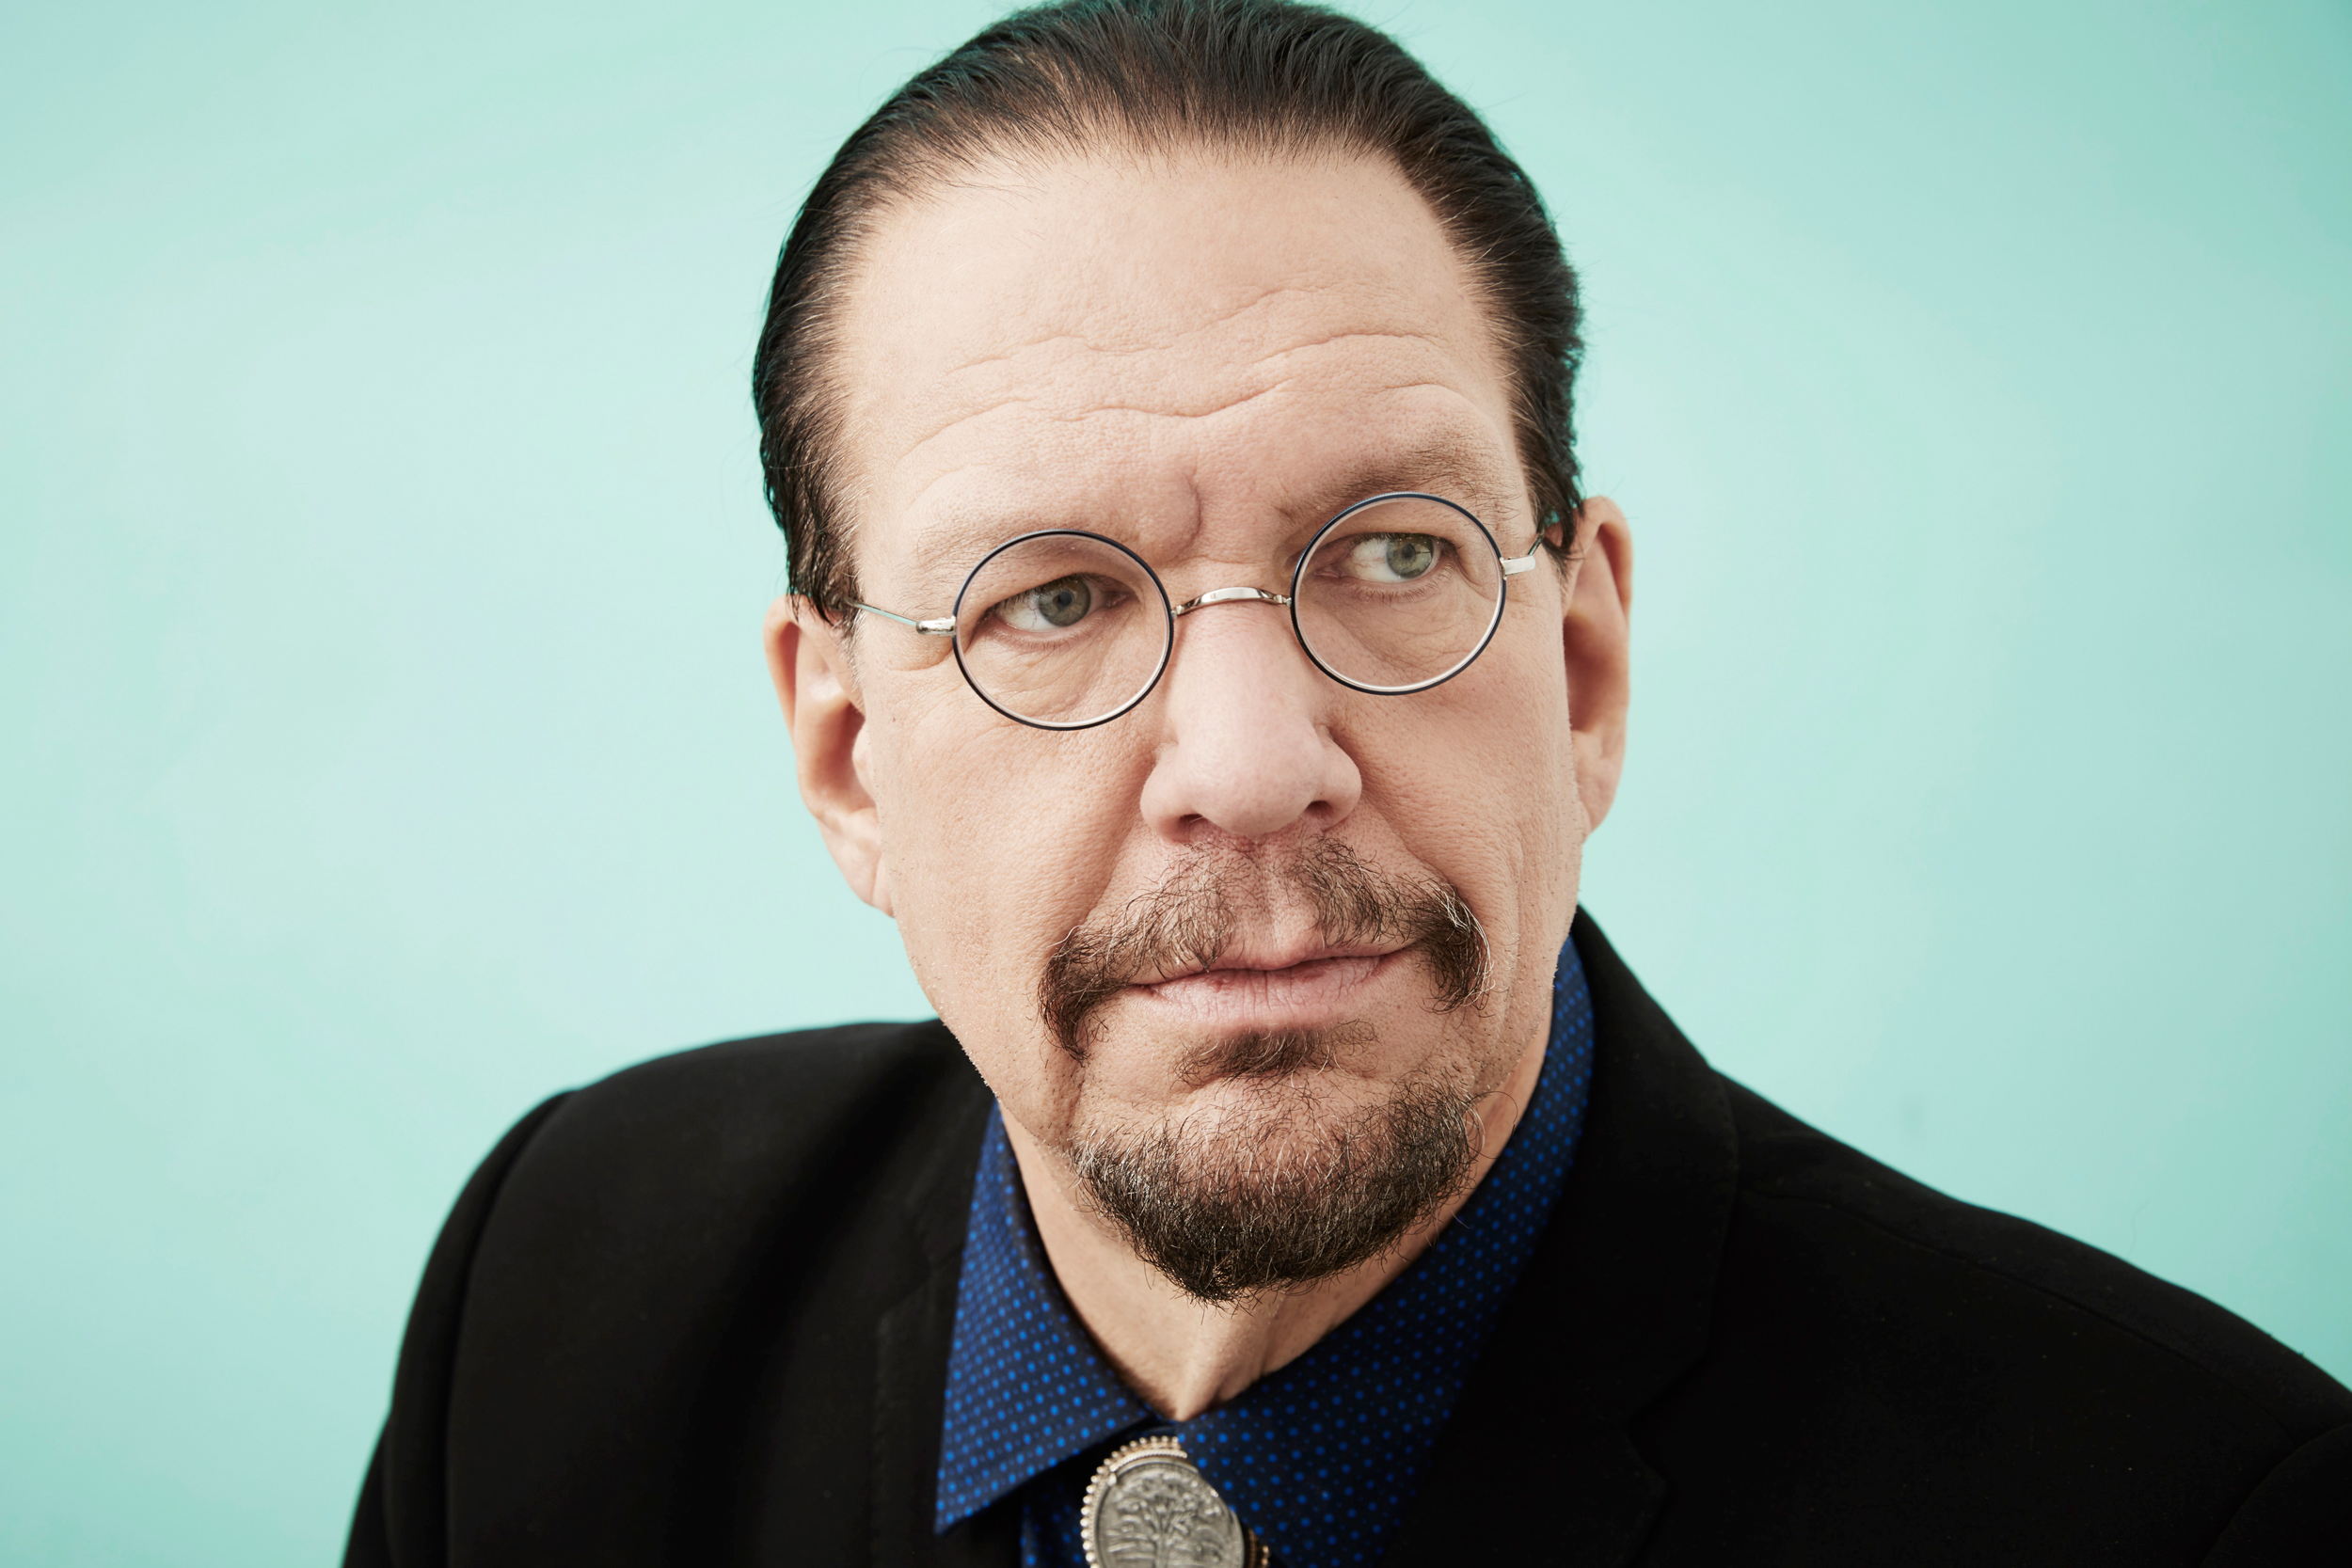 Game. Life Podcast: Why Penn Jillette's Getting Into Videogames